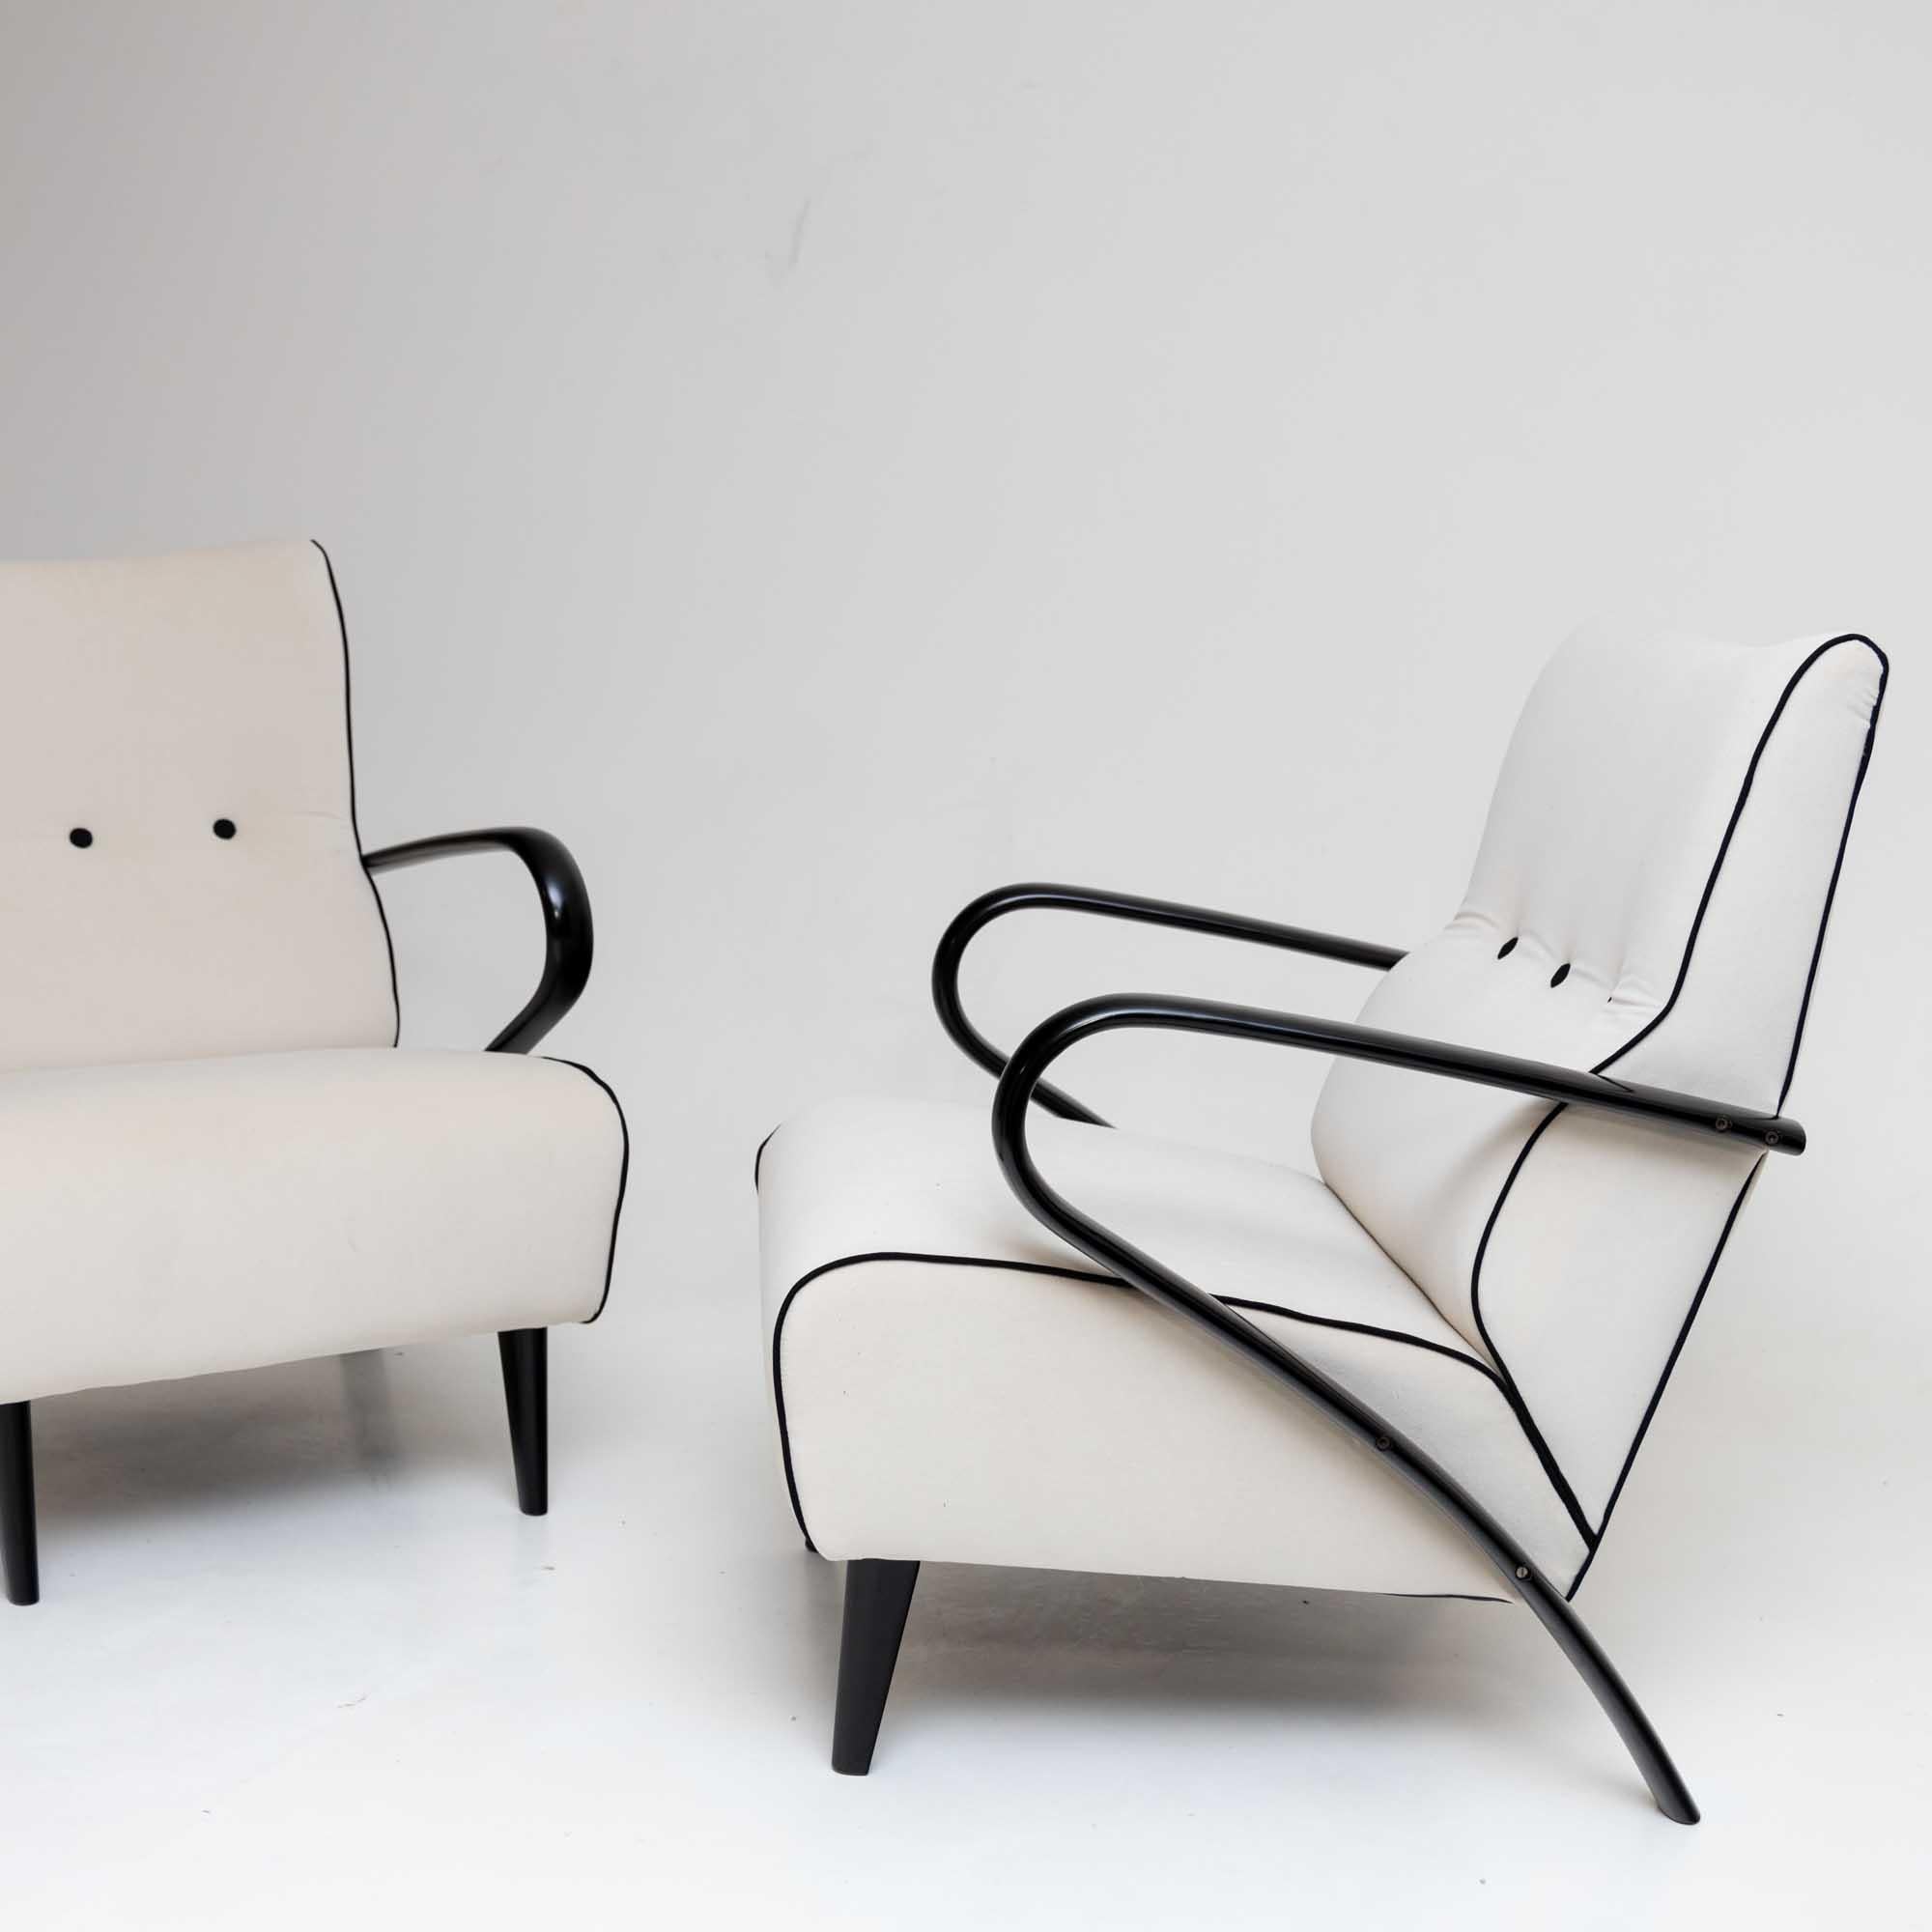 Pair of elegant lounge chairs with ebonized armrests and upholstered seats. The armchairs have been polished and reupholstered. The white fabric is contrasted in a minimalist way by black buttons and black piping.